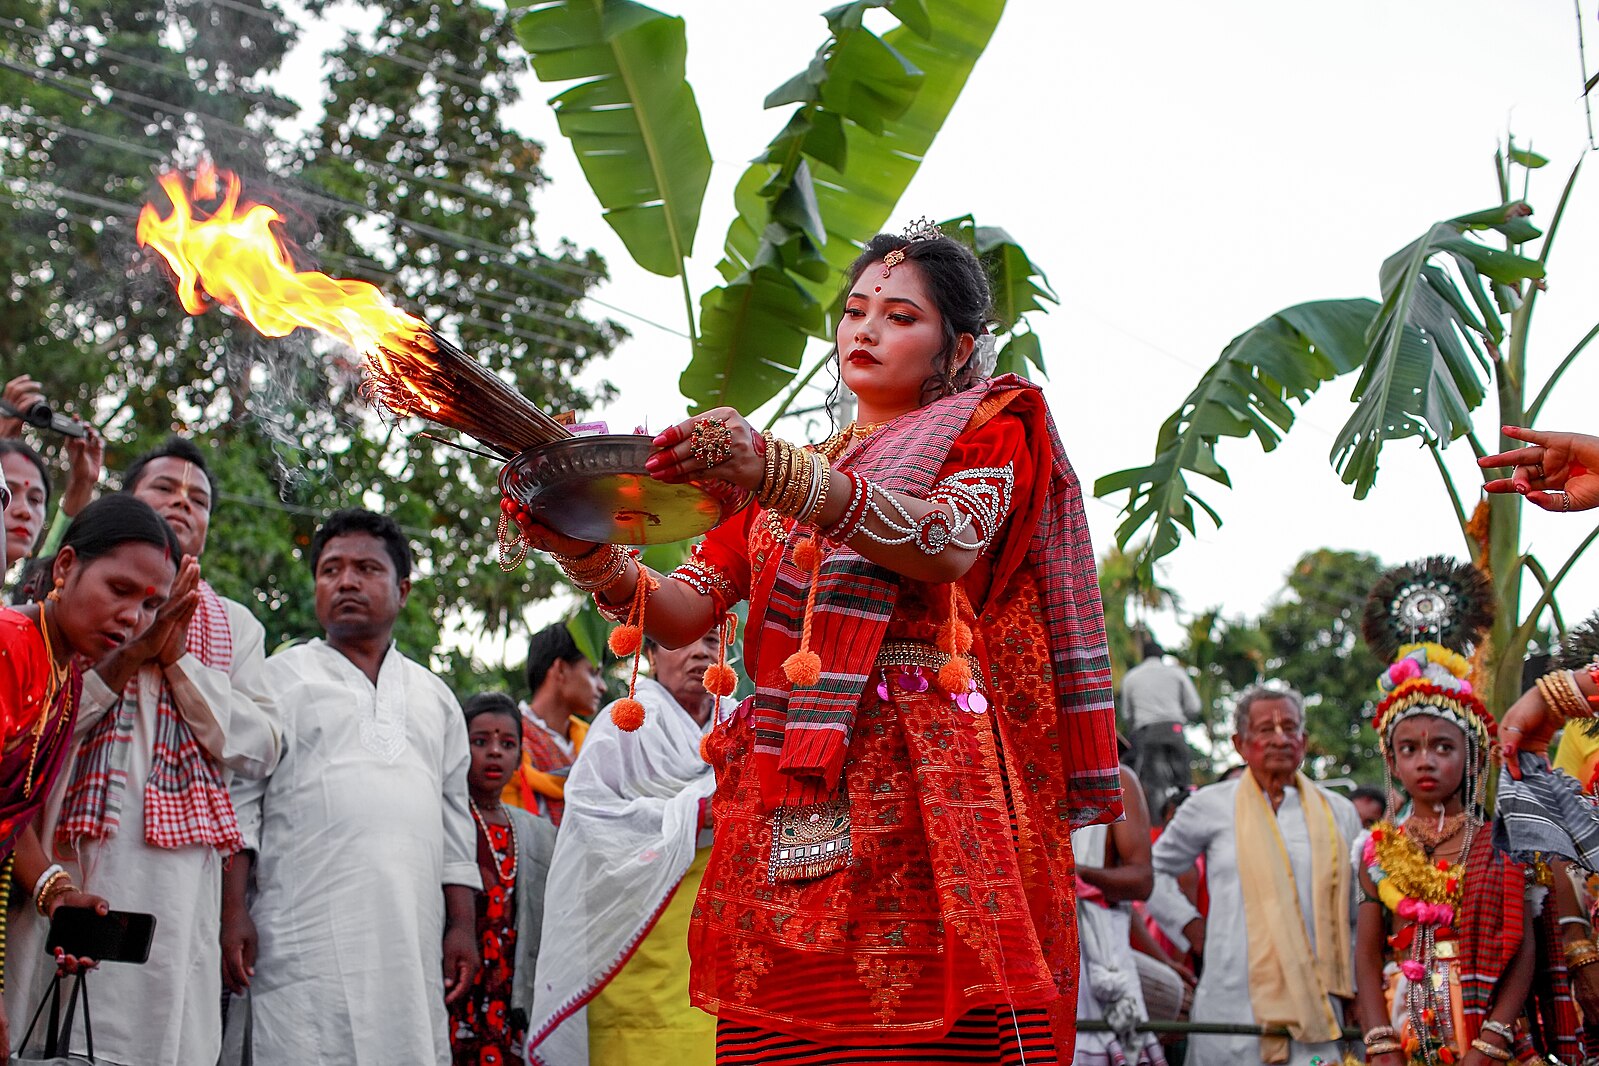 Woman performing with incense and fire on a street during a festival in Bangladesh.